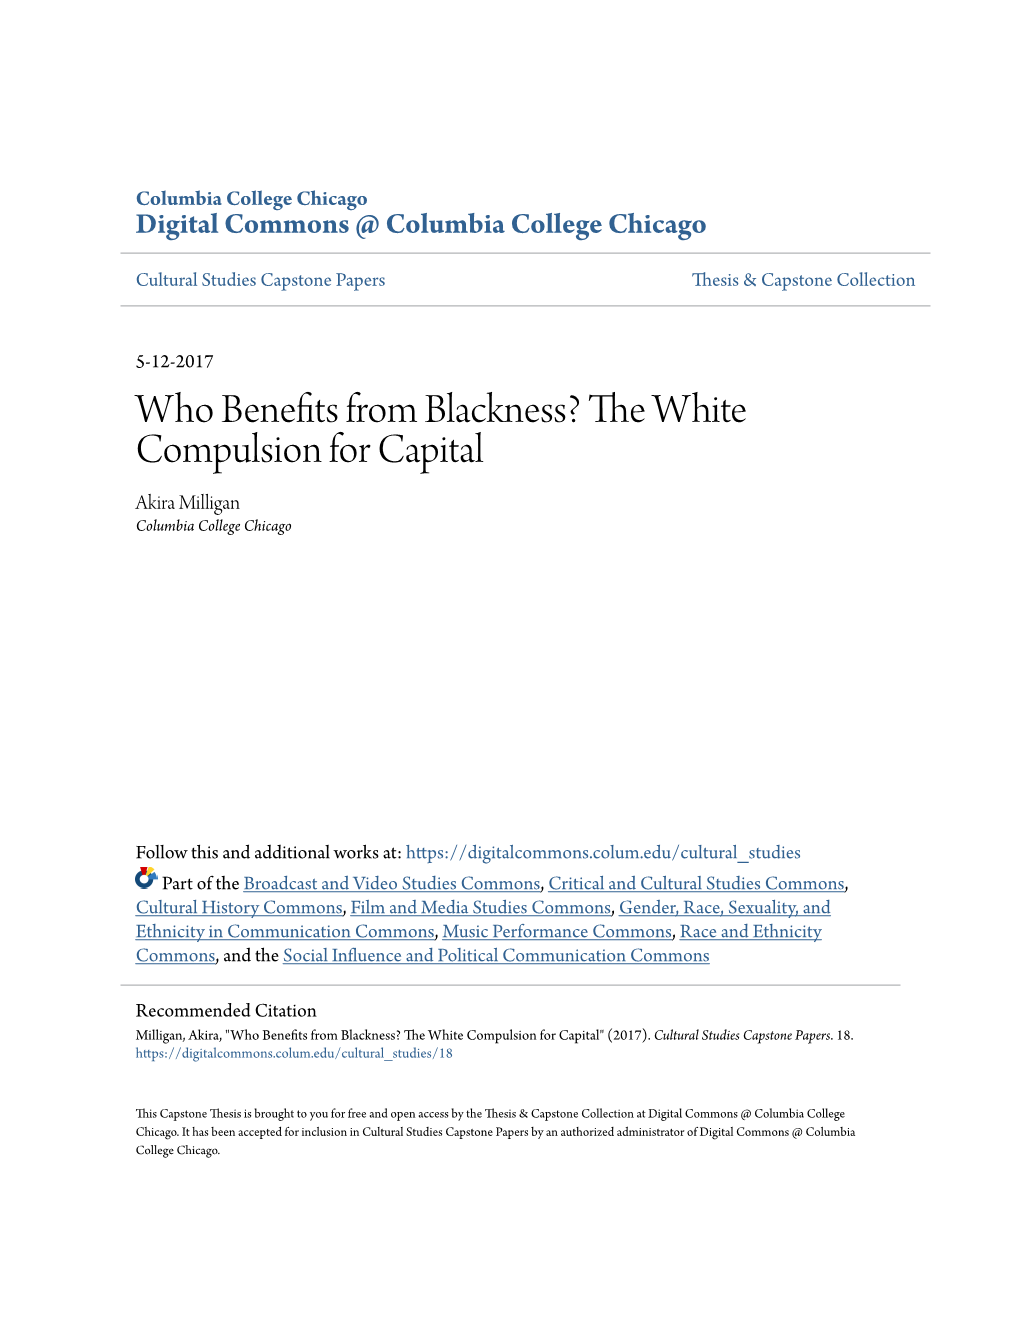 Who Benefits from Blackness? the White Compulsion for Capital Akira Milligan Columbia College Chicago